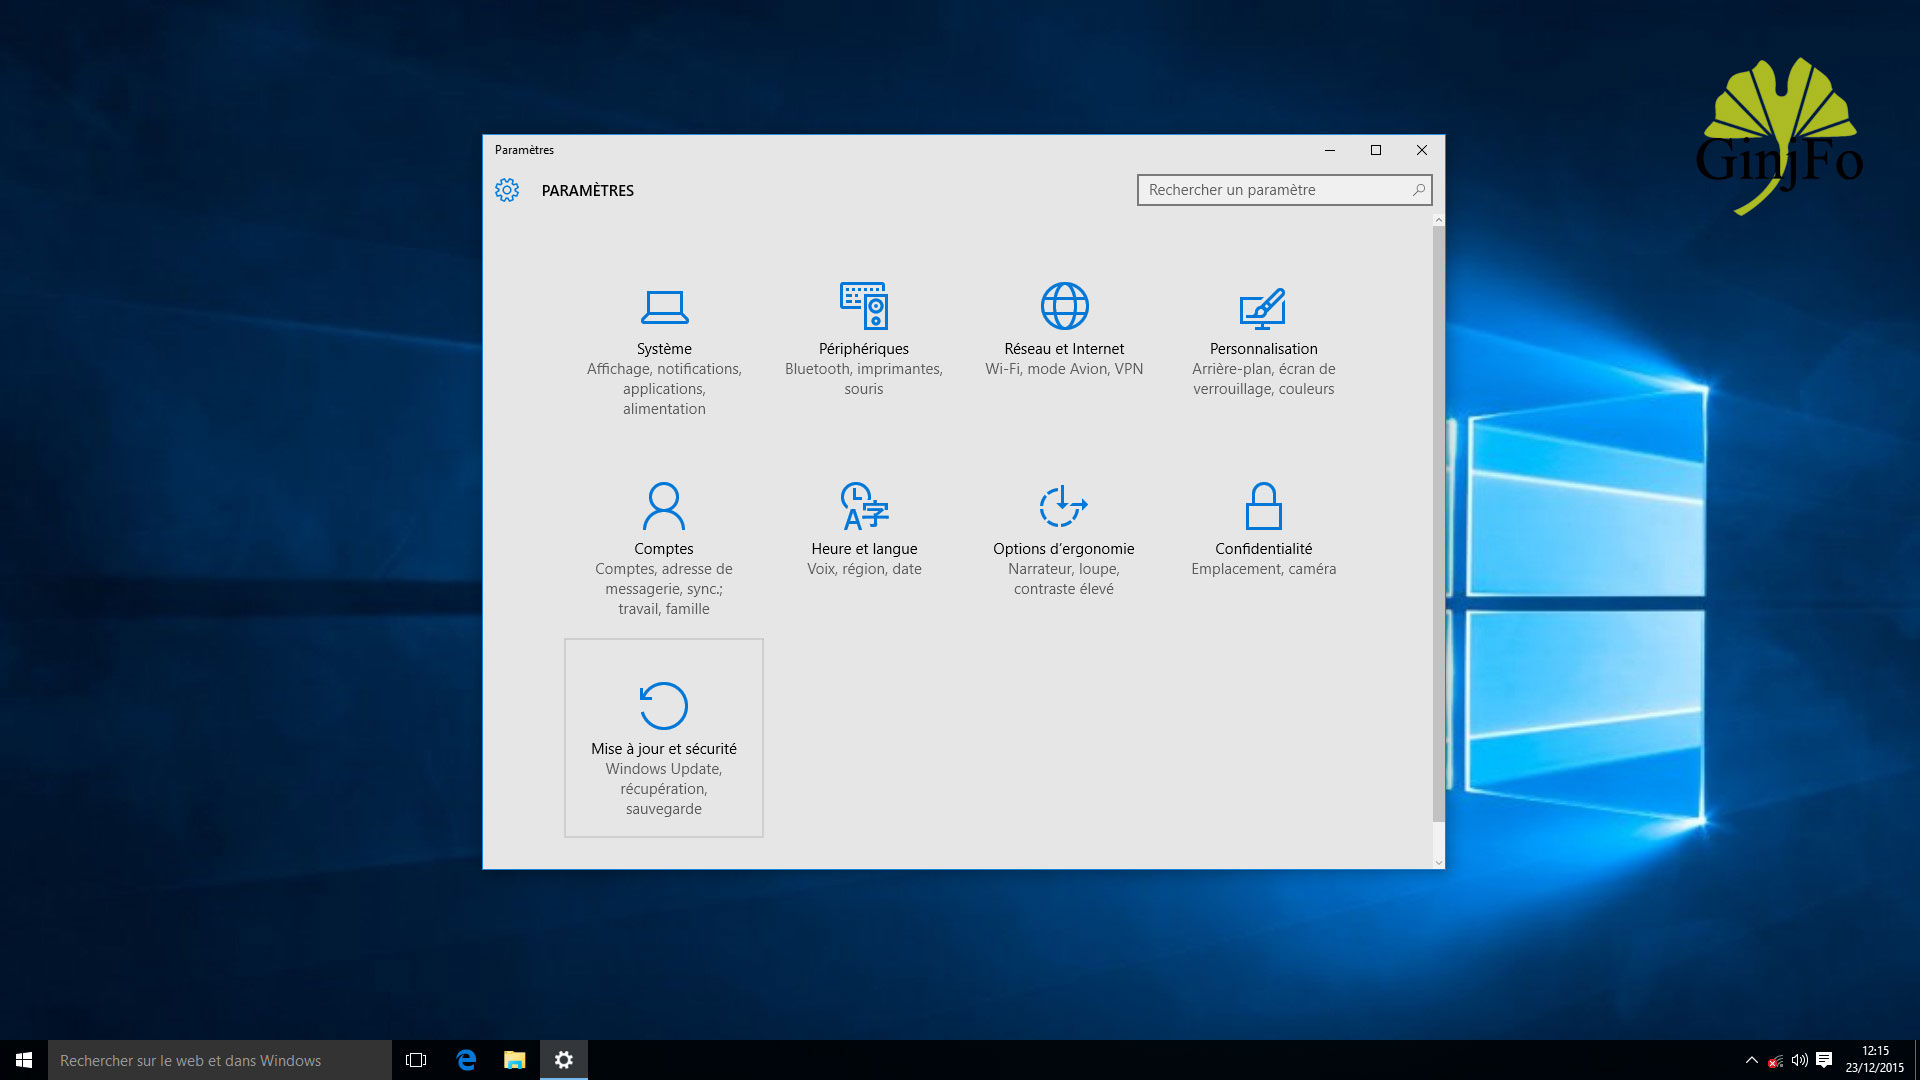 difference between windows 10 pro and windows 10 home